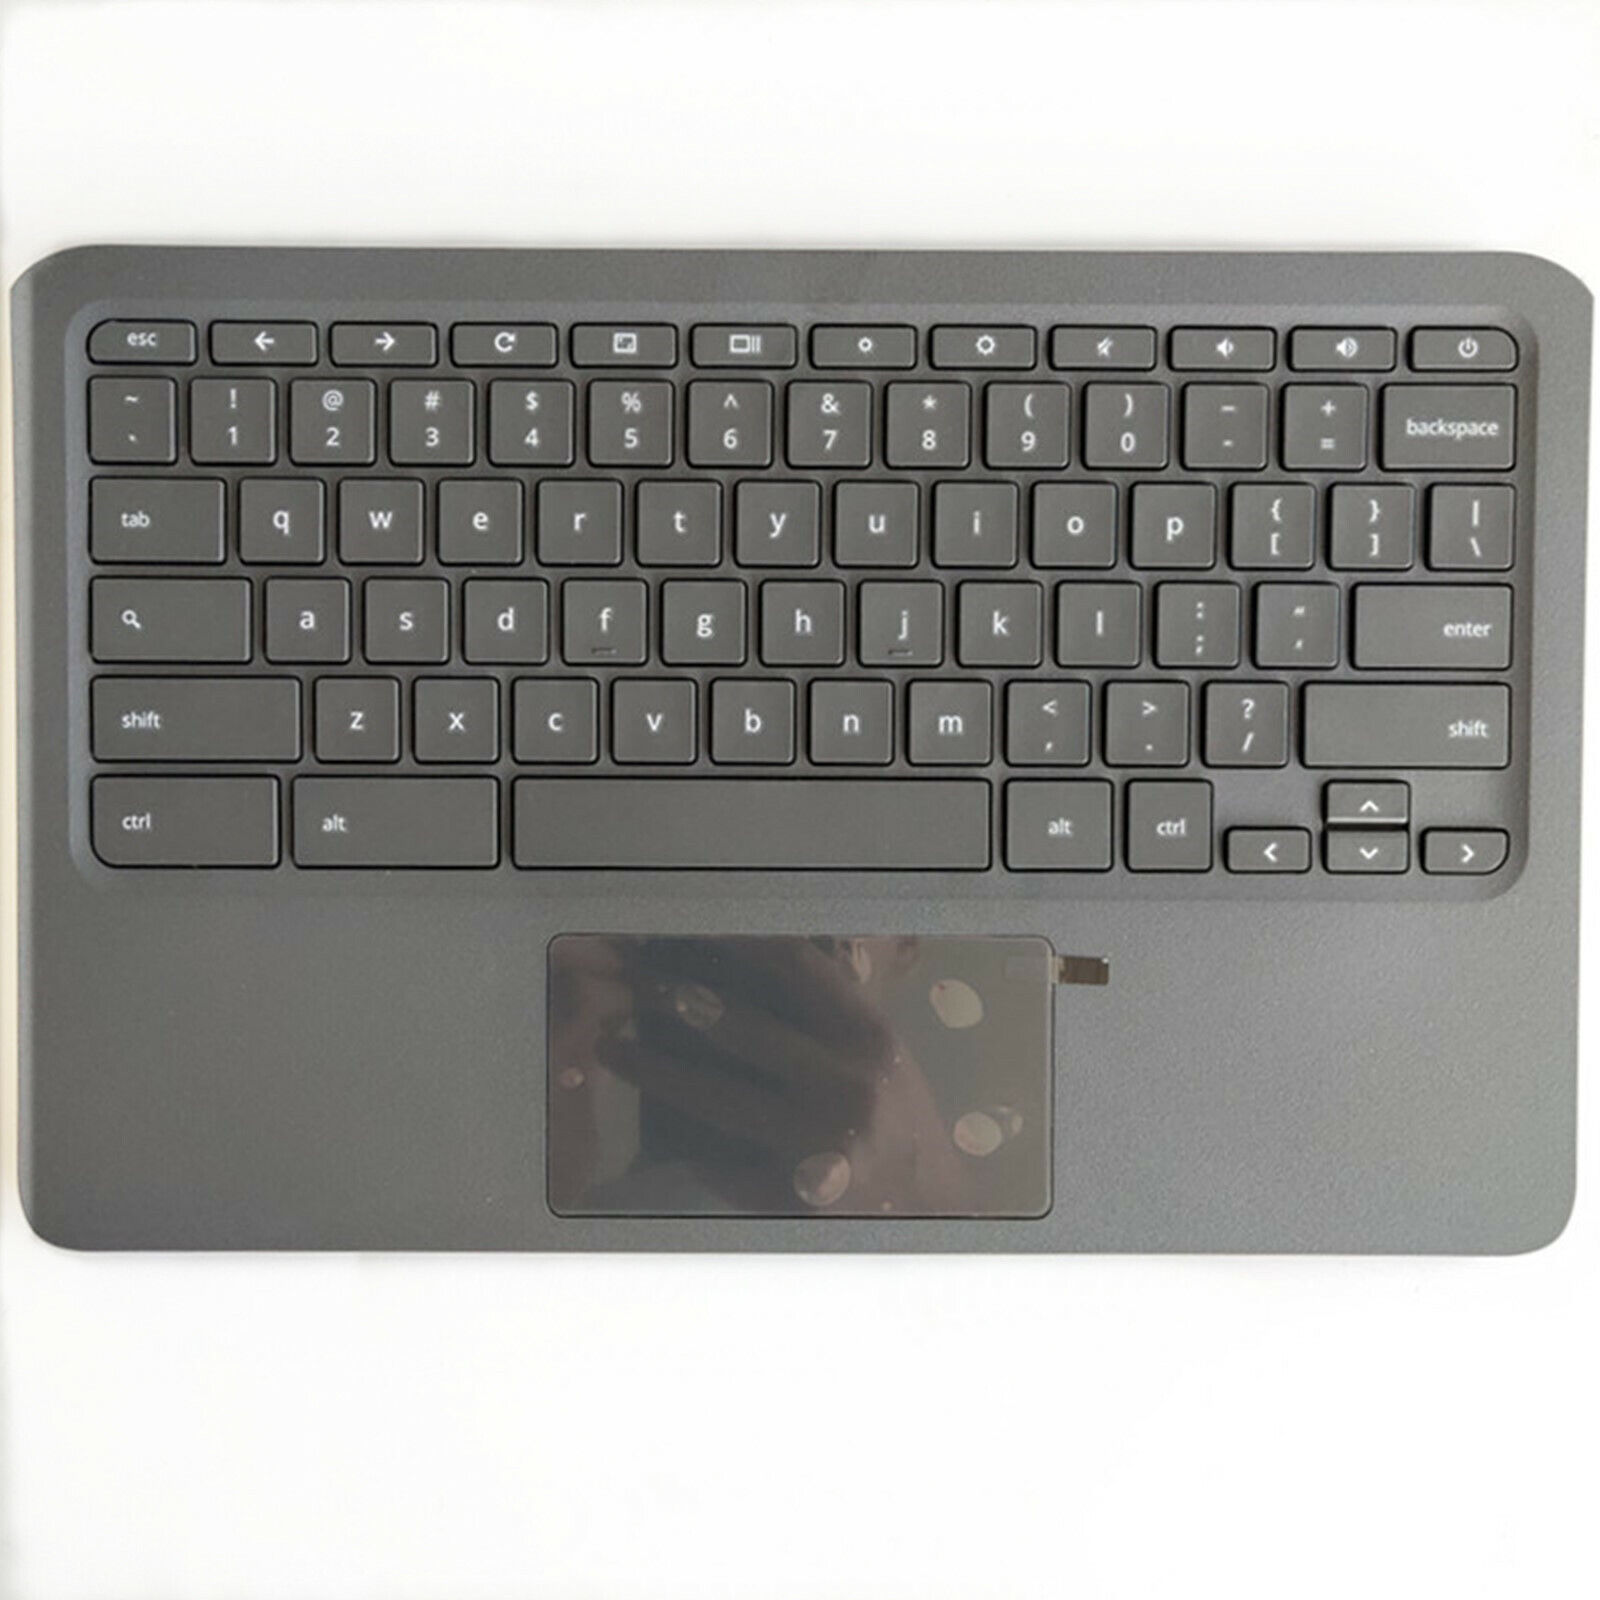 Top Case For HP Chromebook 11 G6 EE Palmrest Keyboard & Touchpad L14921-001 US